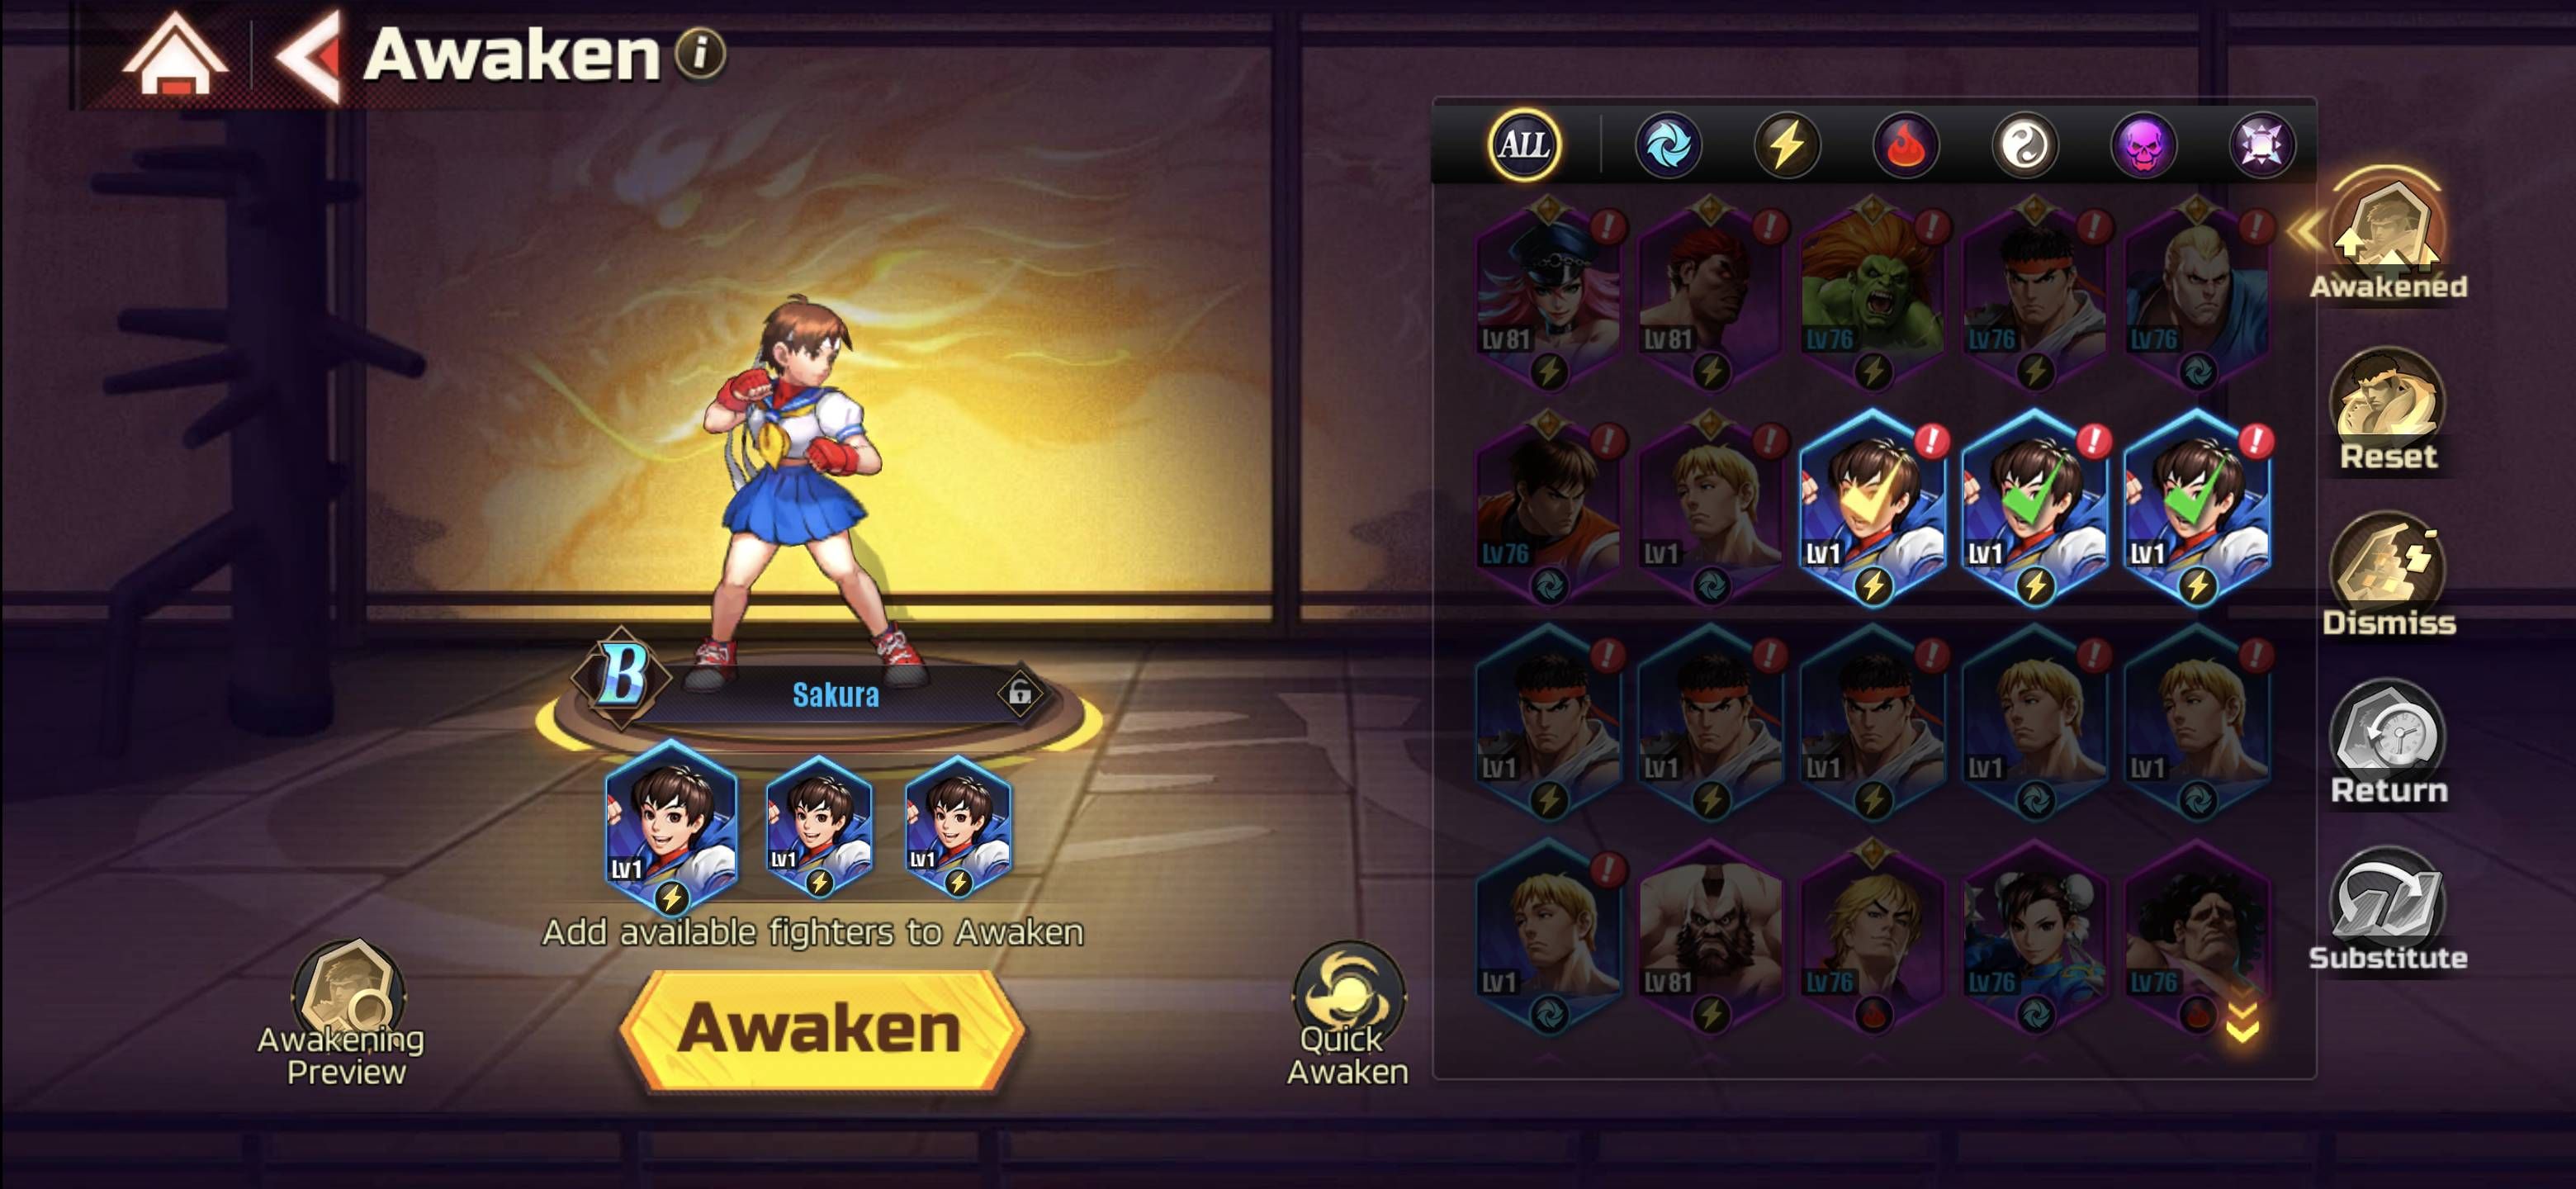 Street Fighter: Duel's Awaken screen reveals that Sakura is about to be improved.